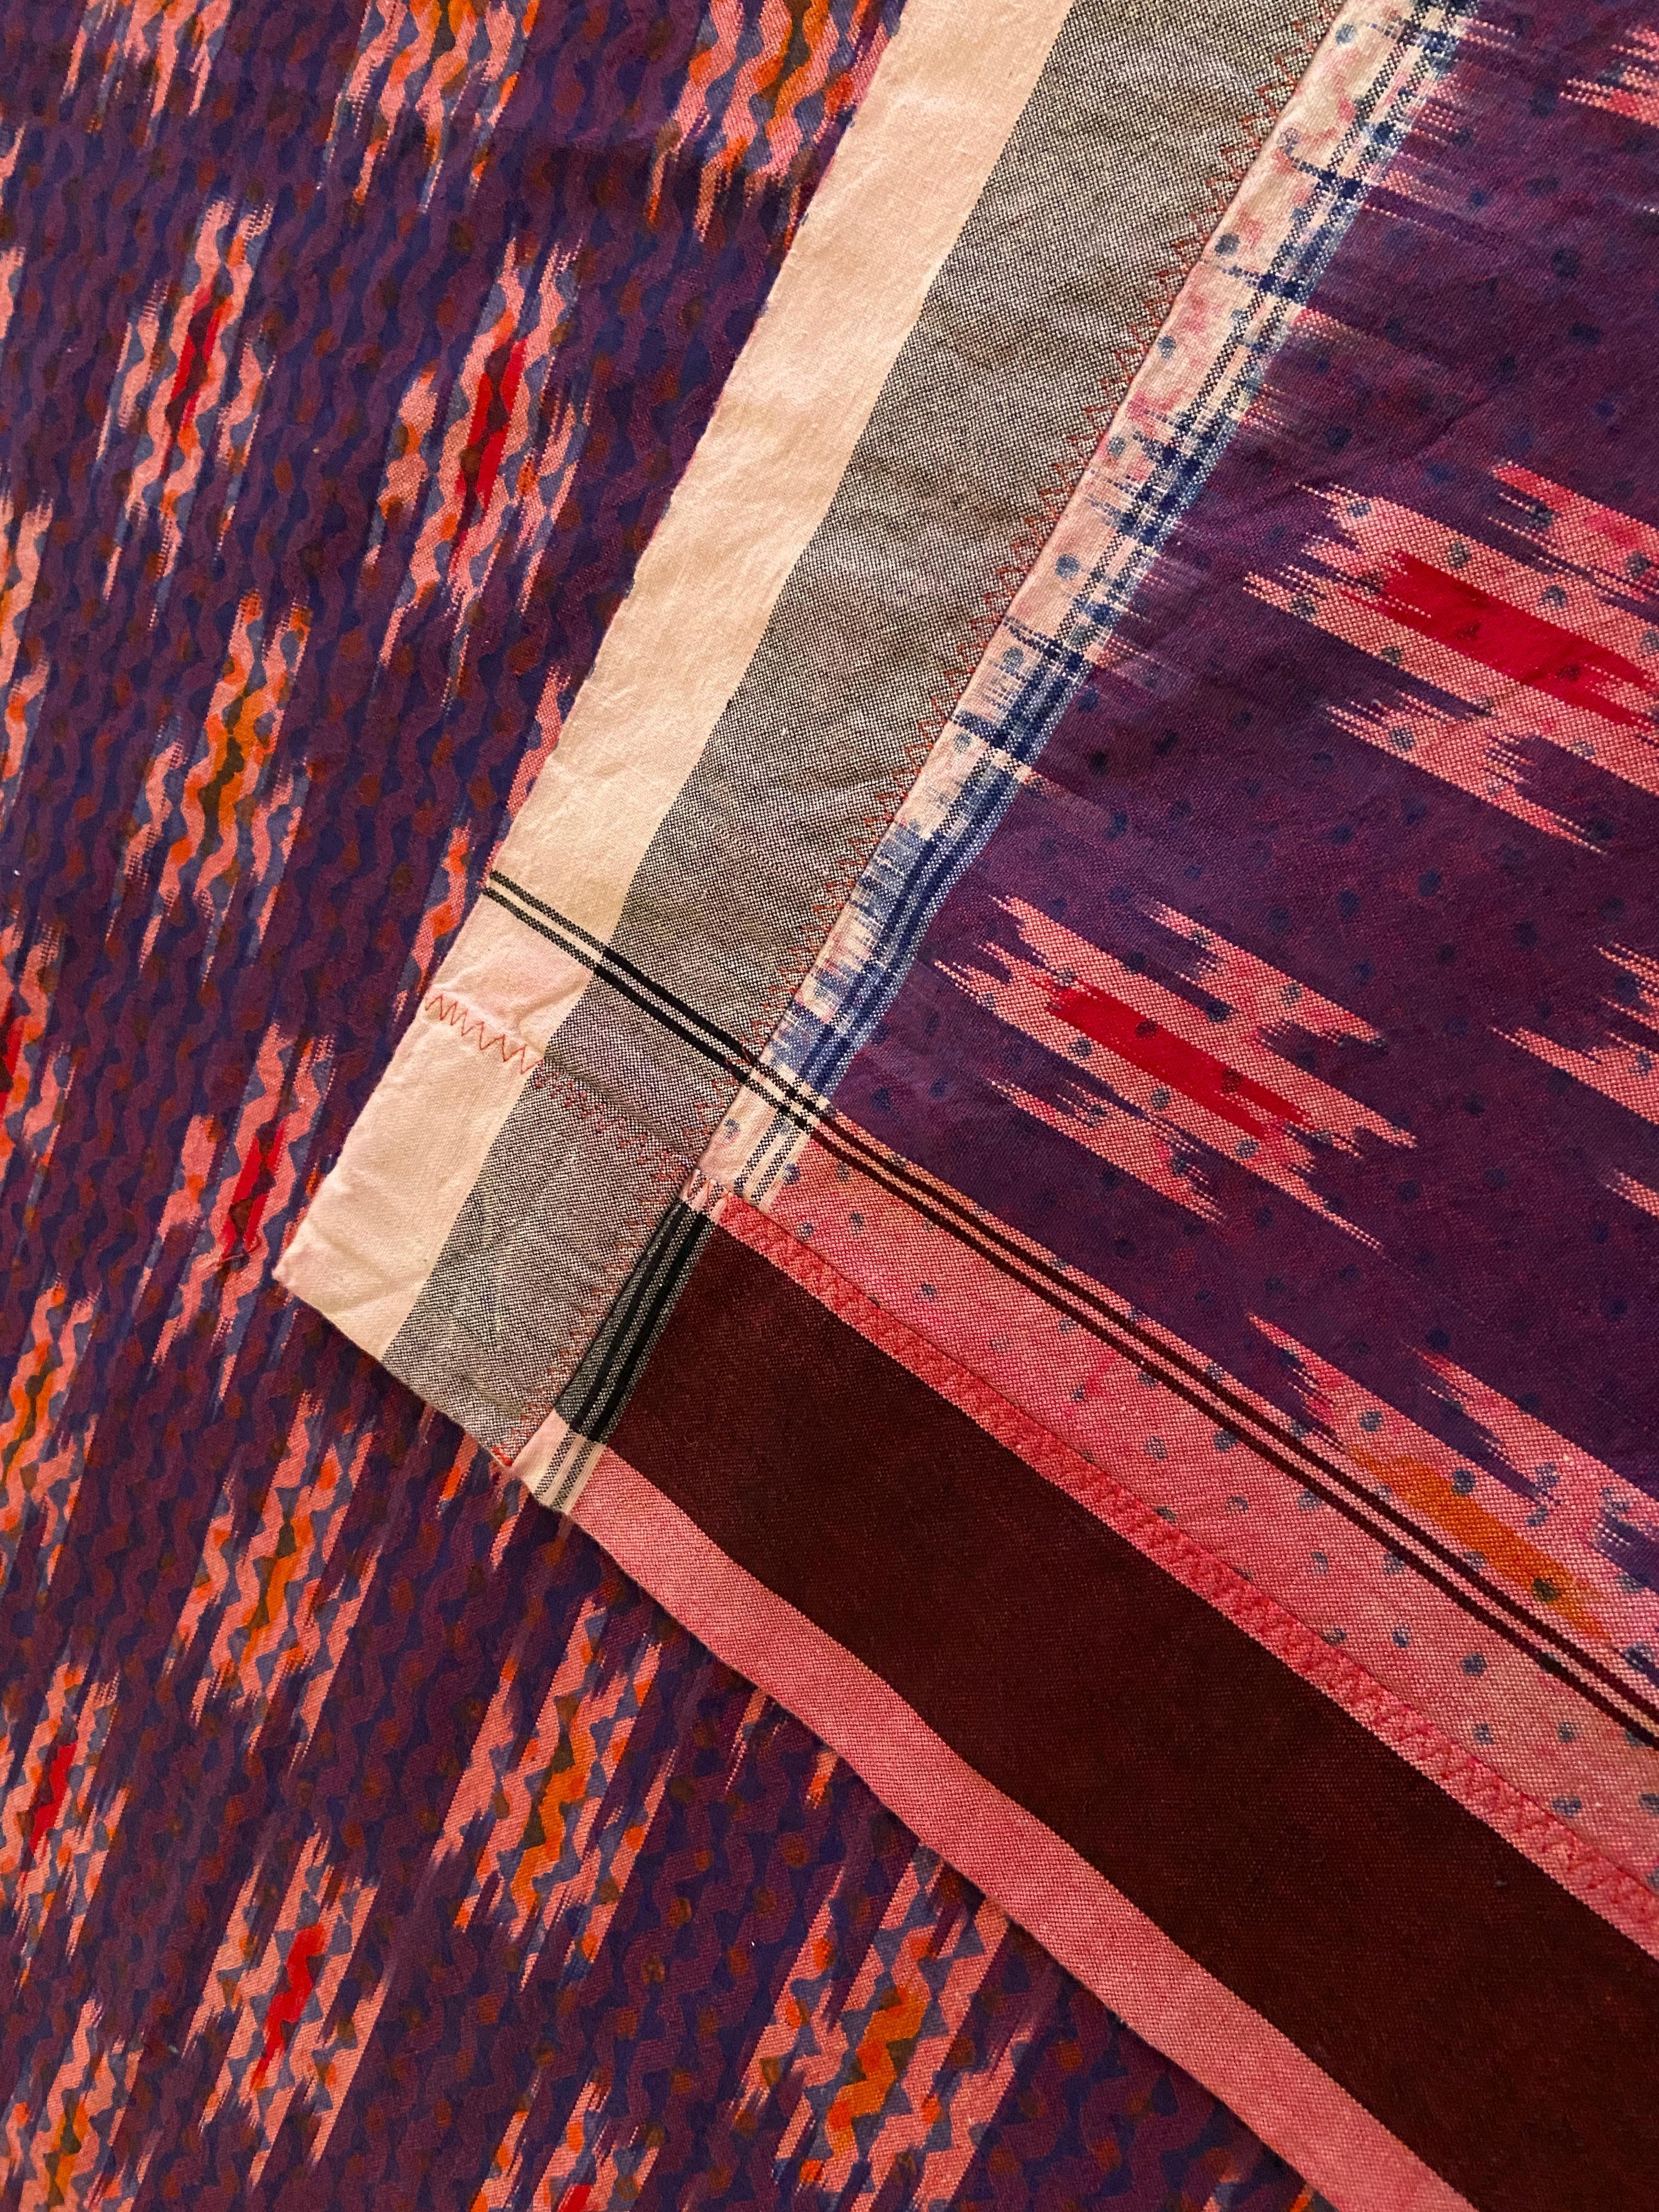 Contemporary Gregory Parkinson Tablecloth Purple Pink Ikat Hand-Blocked Patterns In New Condition In Copenhagen K, DK